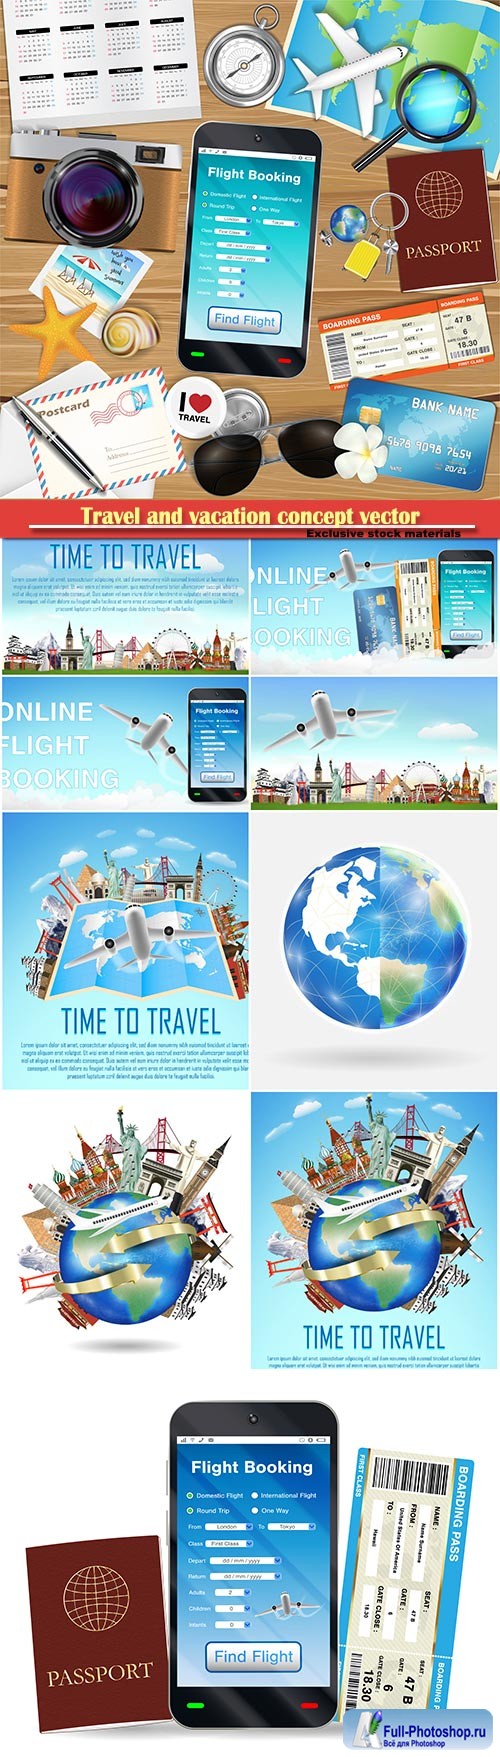 Travel and vacation concept vector illustration